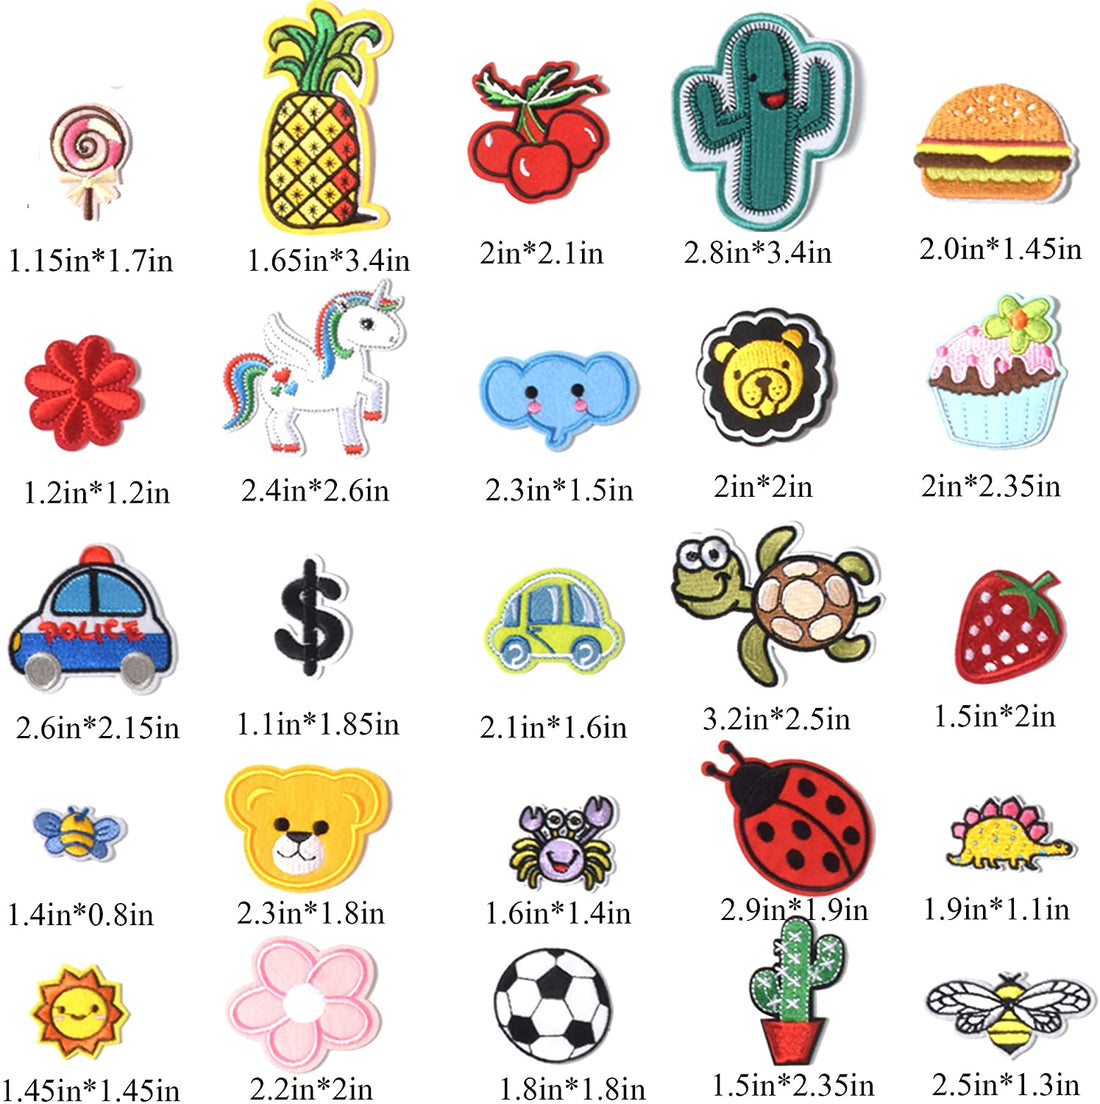 60pcs Random Assorted Styles Embroidered Patches, Bright Vivid Colors, Sew  On/Iron On Patch Applique for Clothes, Dress, Hat, Jeans, DIY Accessories 